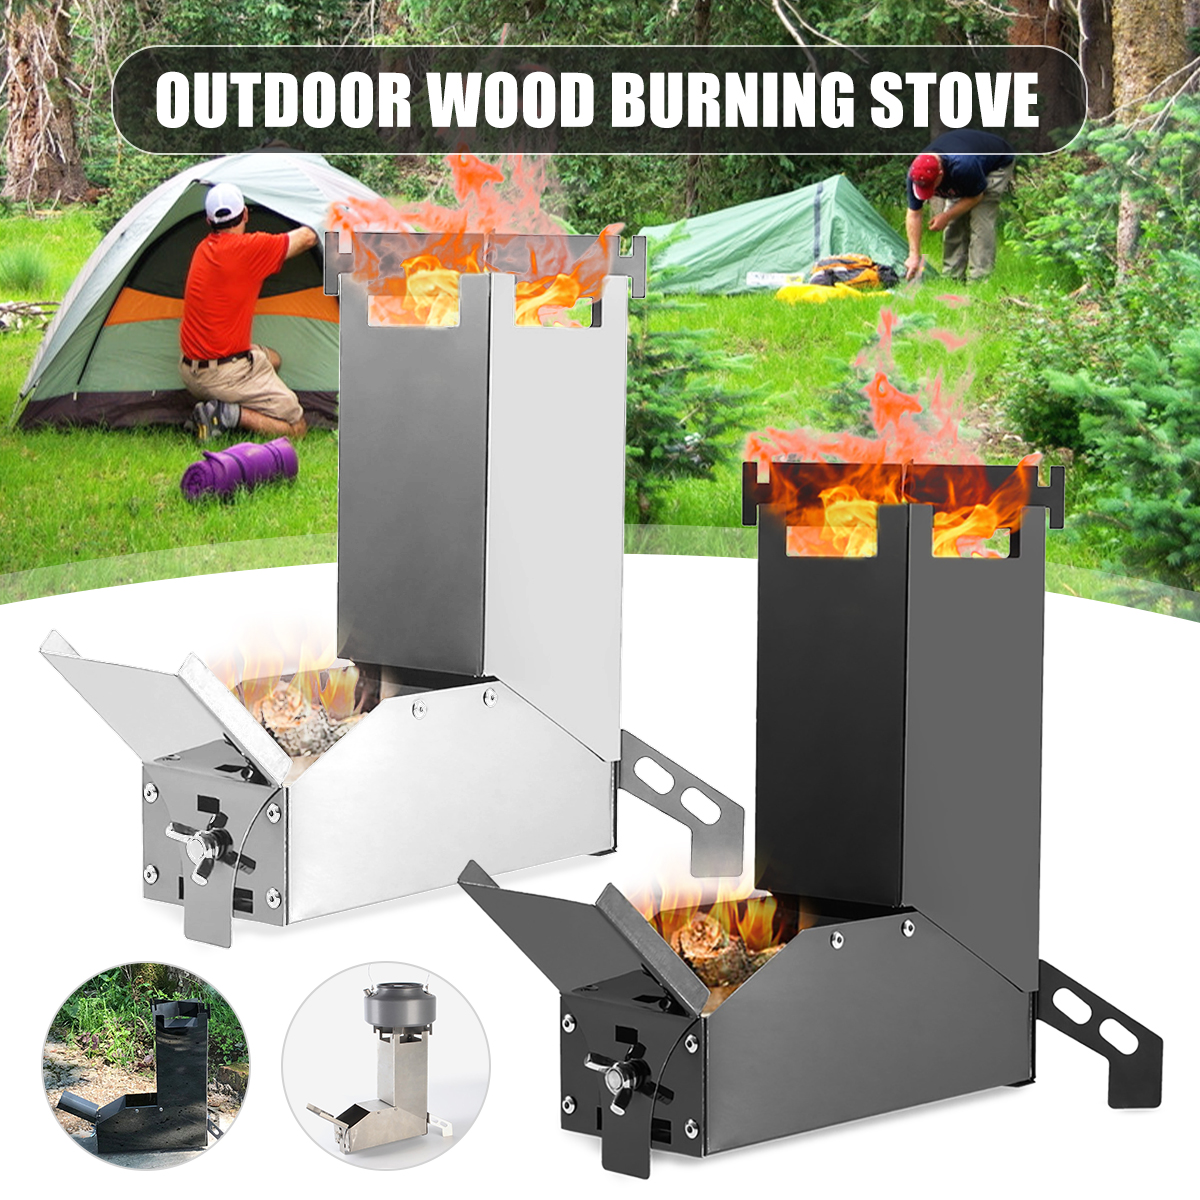 Camping Wood Stove Folding Oven For Outdoor Survival Sale Picnic Cooking R6T2 